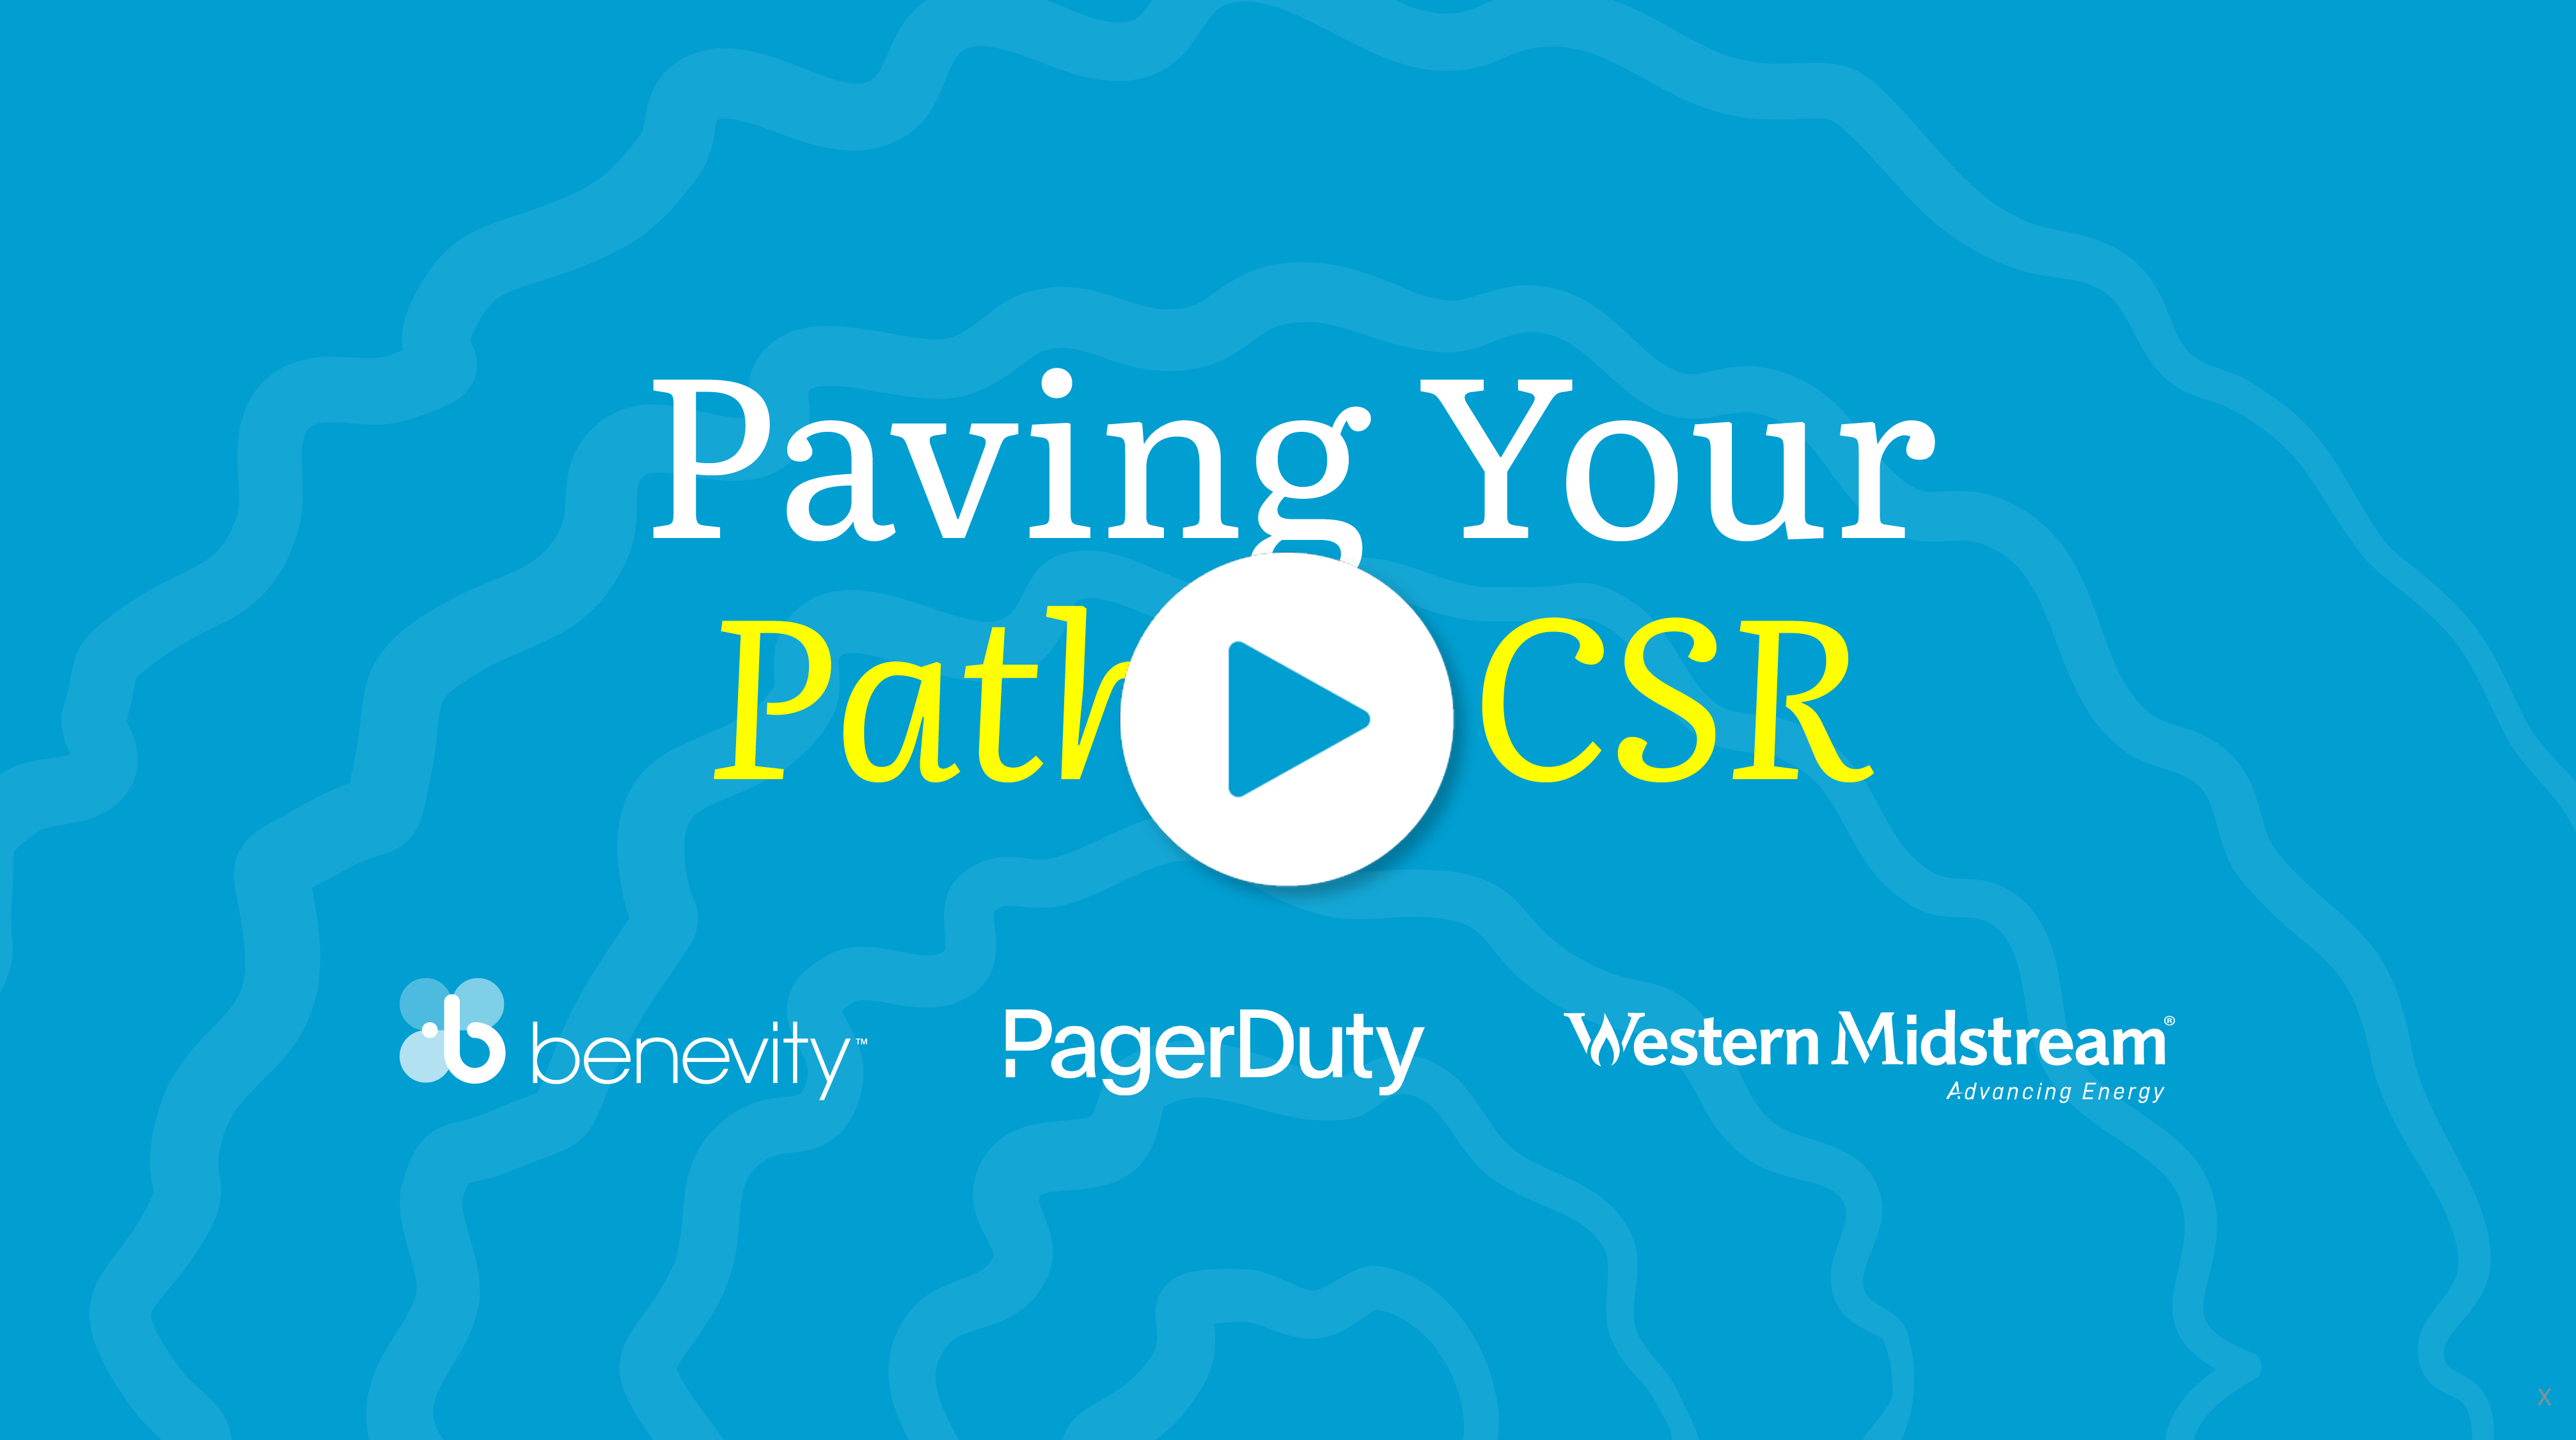 Paving Your Path to CSR